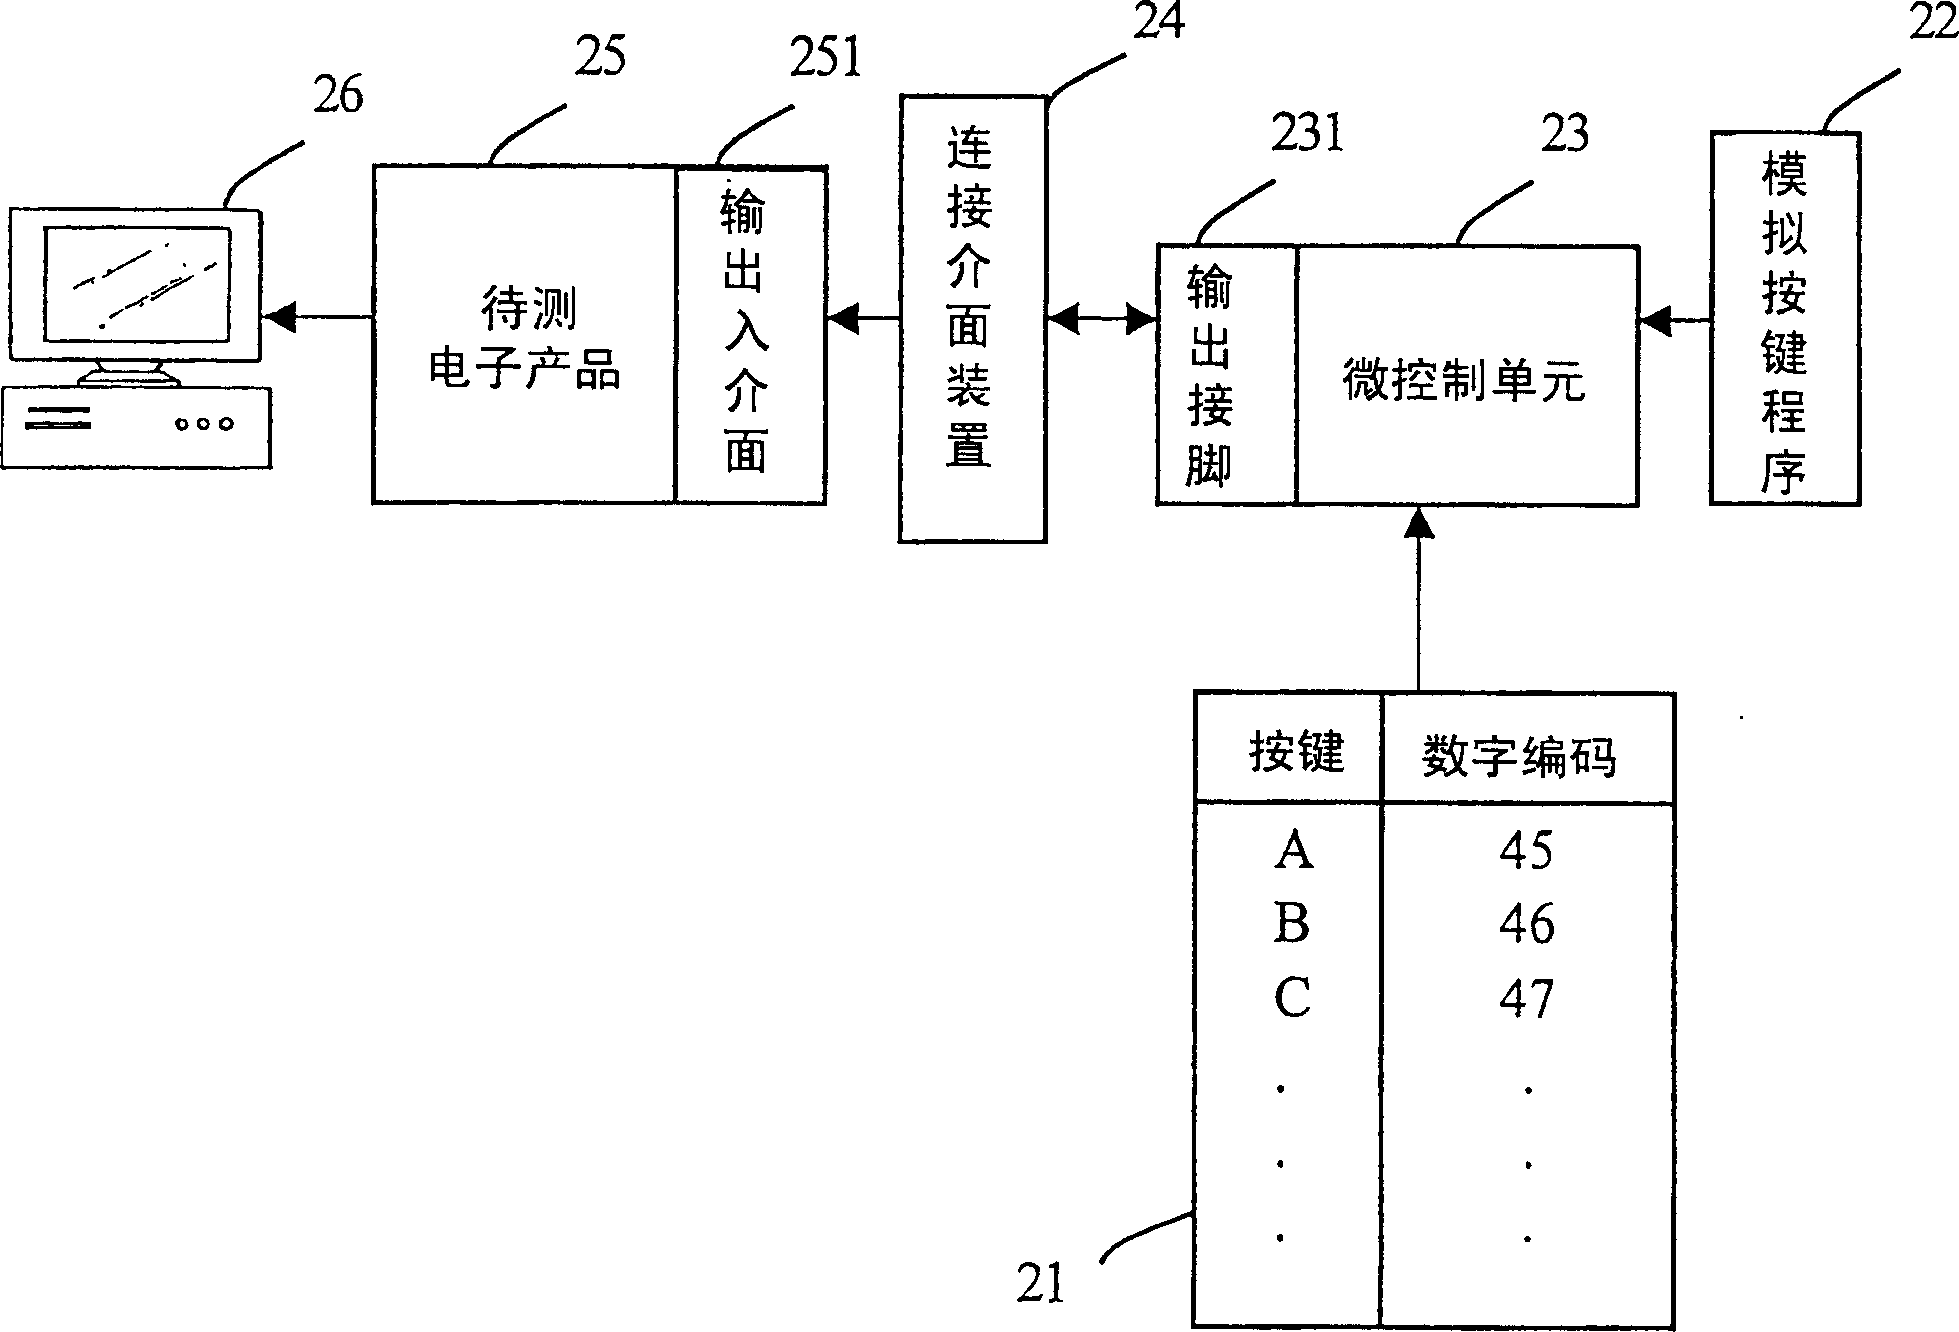 System of automatized simulating man to press keyboard